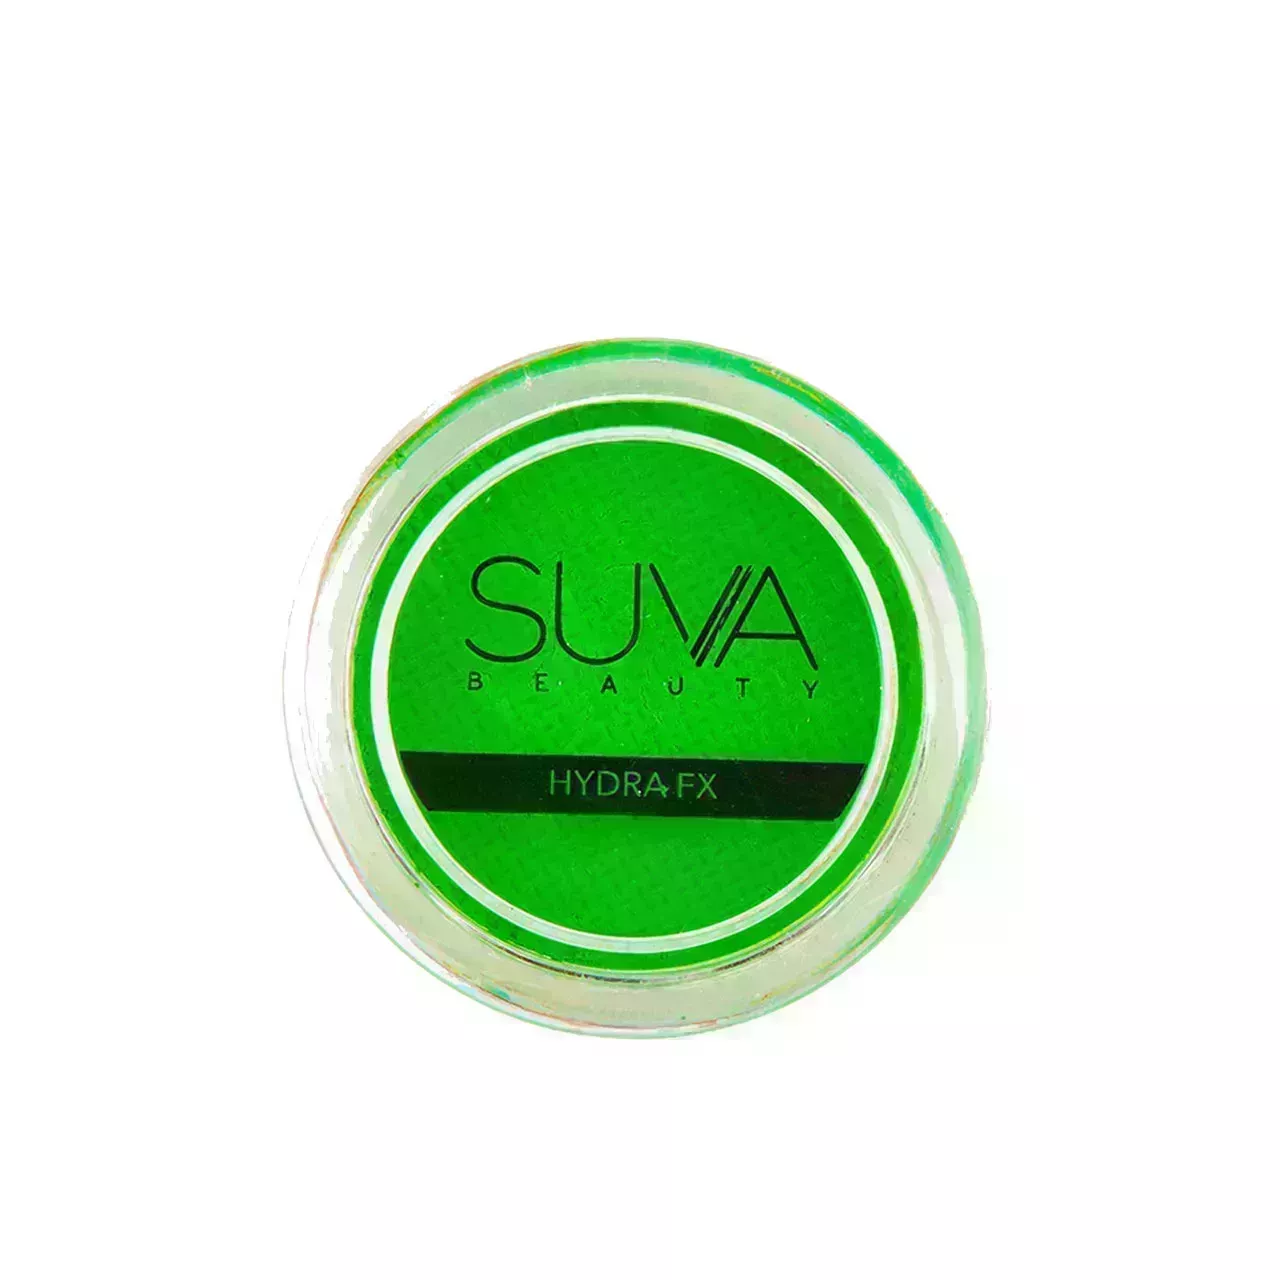 Suva Beauty Hydra FX Liners in neon green shade Fanny Pack on white background